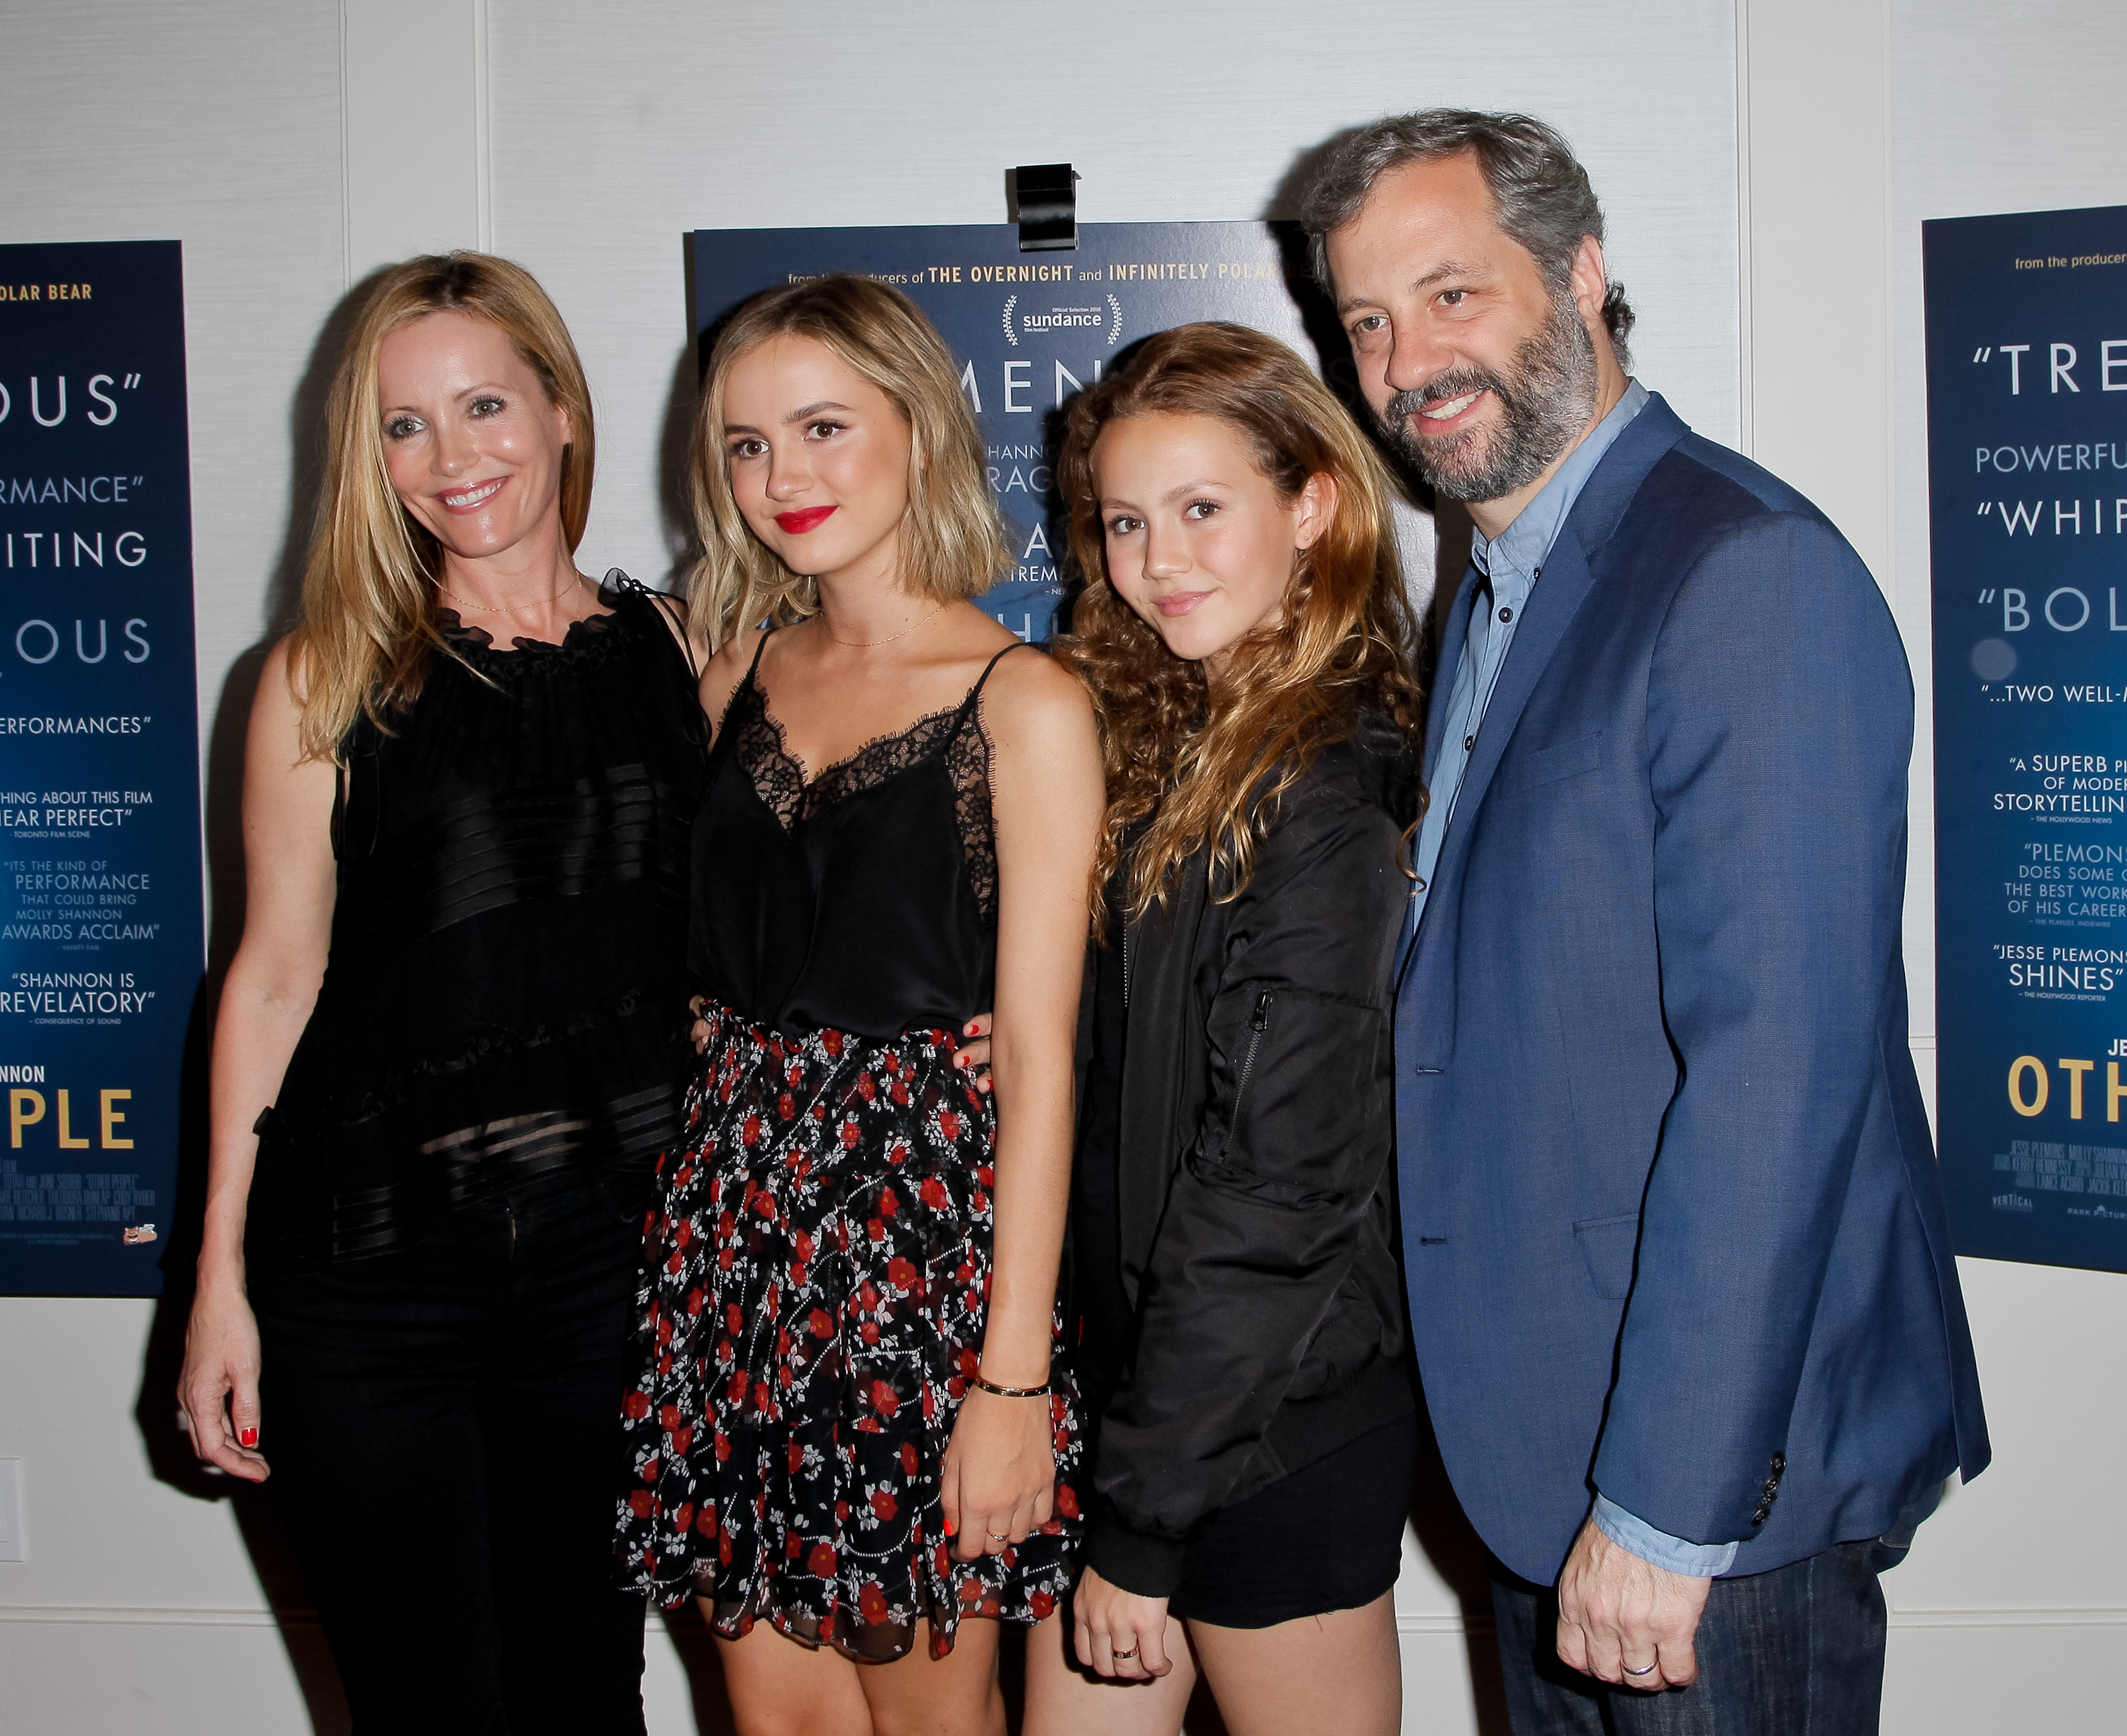 Leslie Mann, Maude Apatow, Iris Apatow and Judd Apatow pose at the Premiere of Vertical Entertainment's 'Other People' at The London West Hollywood on August 31, 2016, in West Hollywood, California | Source: Getty Images